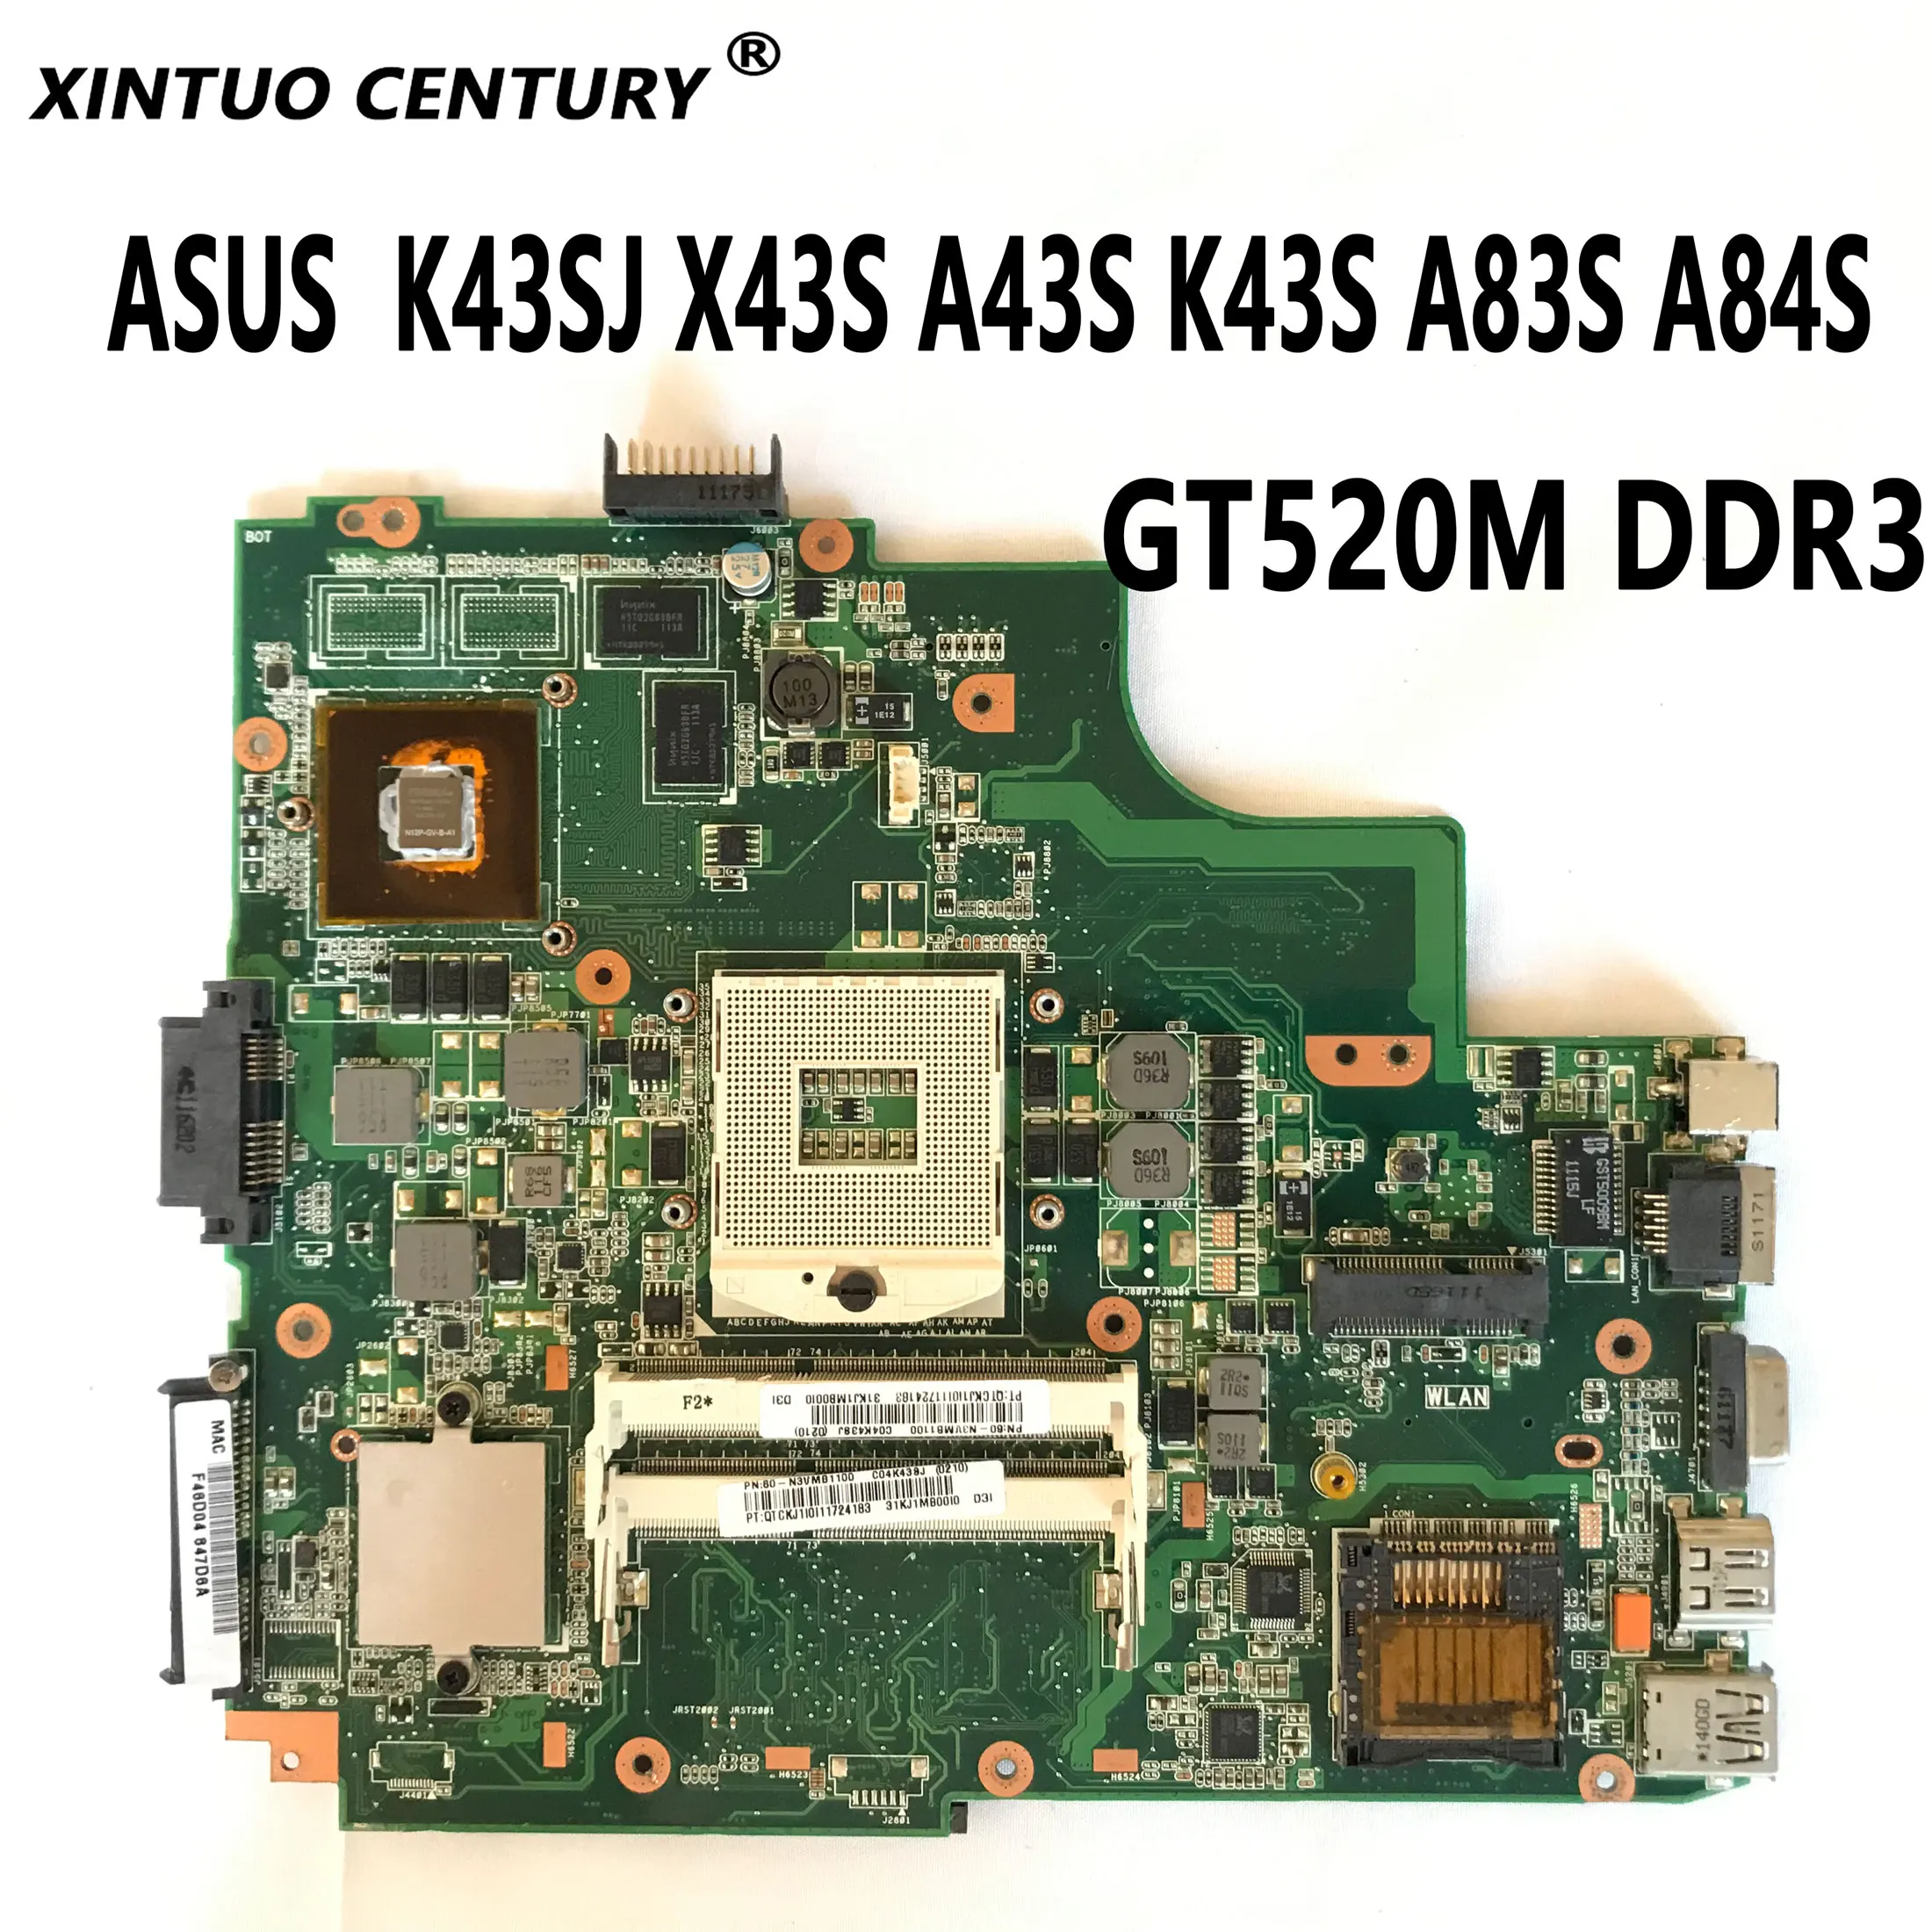 

K43SJ PC laptop motherboard for ASUS X43S A43S K43S A83S A84S K43SV laptop motherboard REV:4.1 1GB GT520M DDR3 100% Test Work